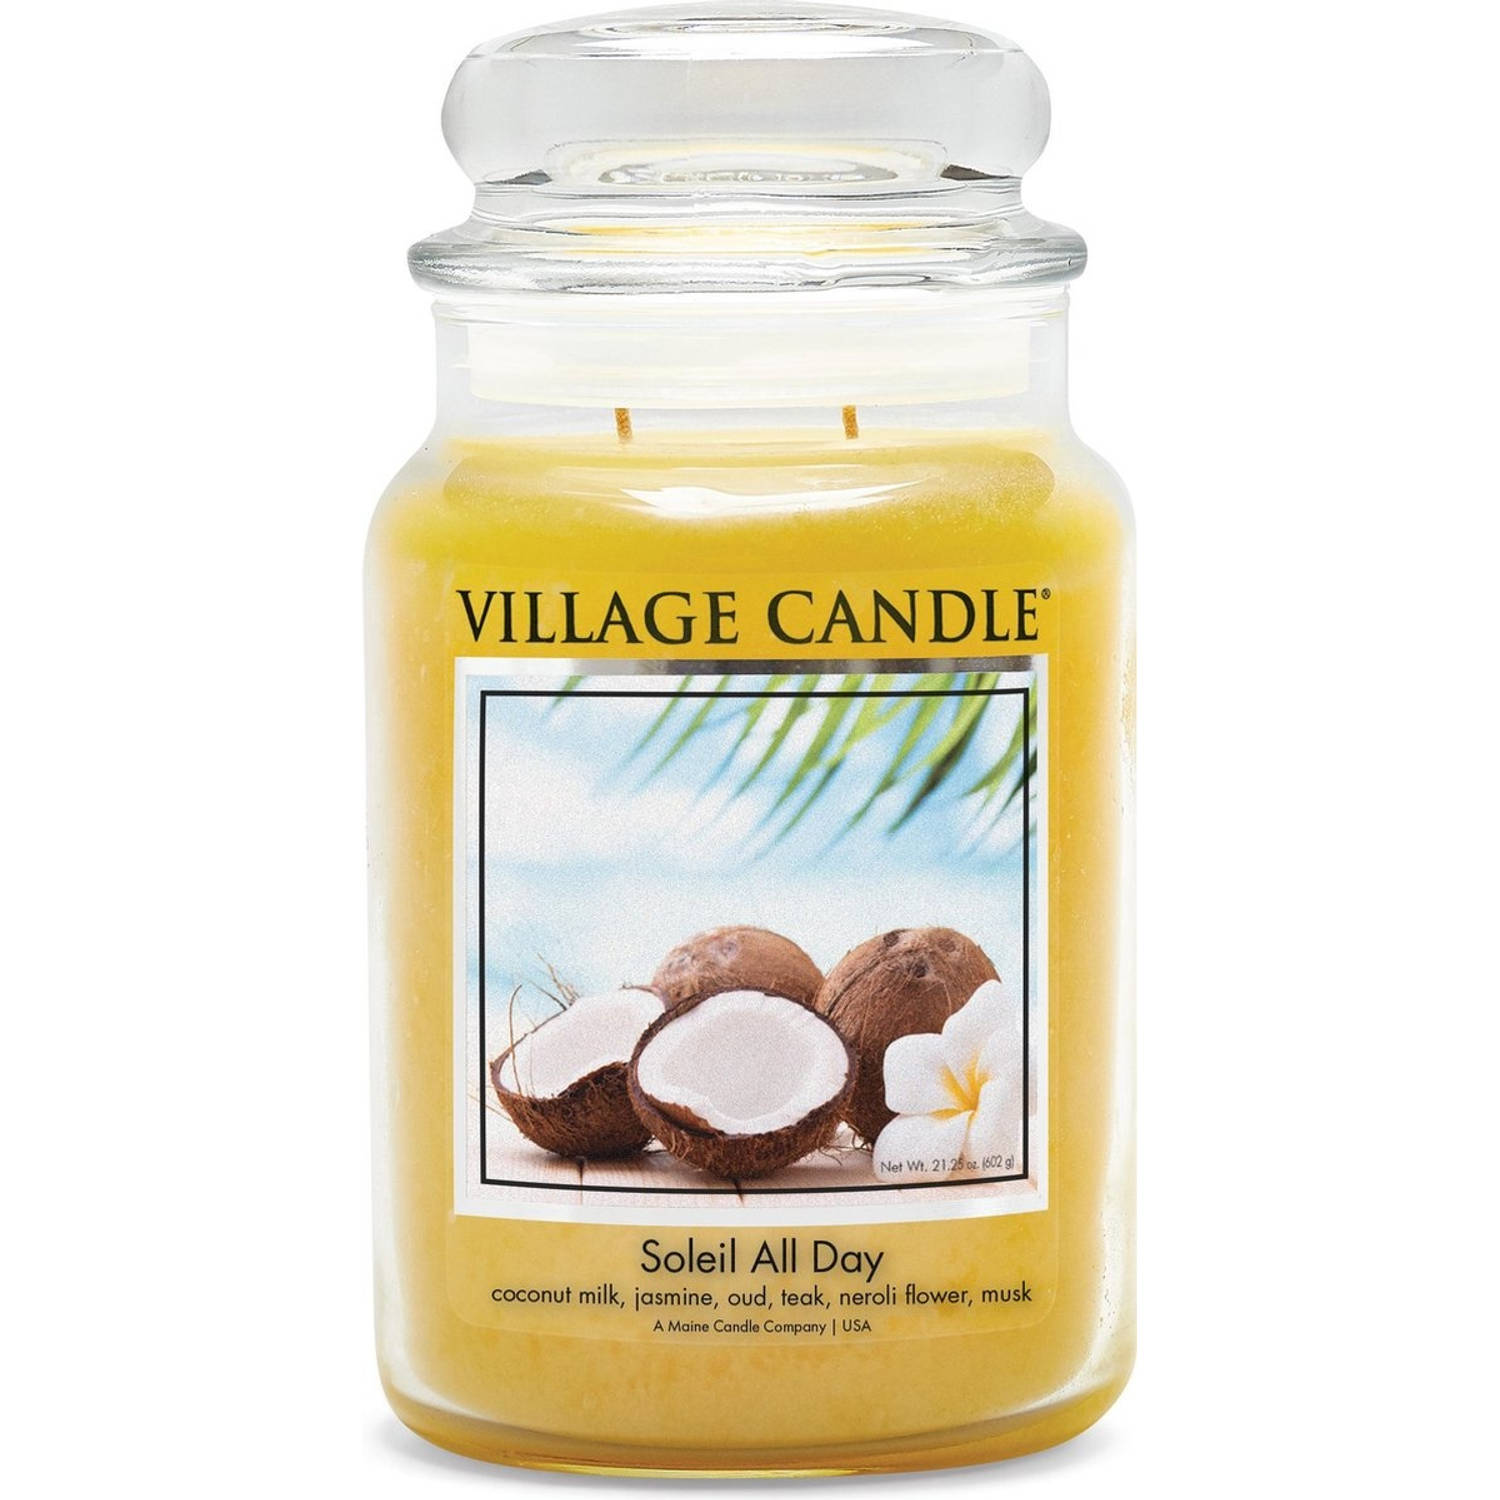 Village Candle - Soleil All Day - Large Candle - 170 Branduren